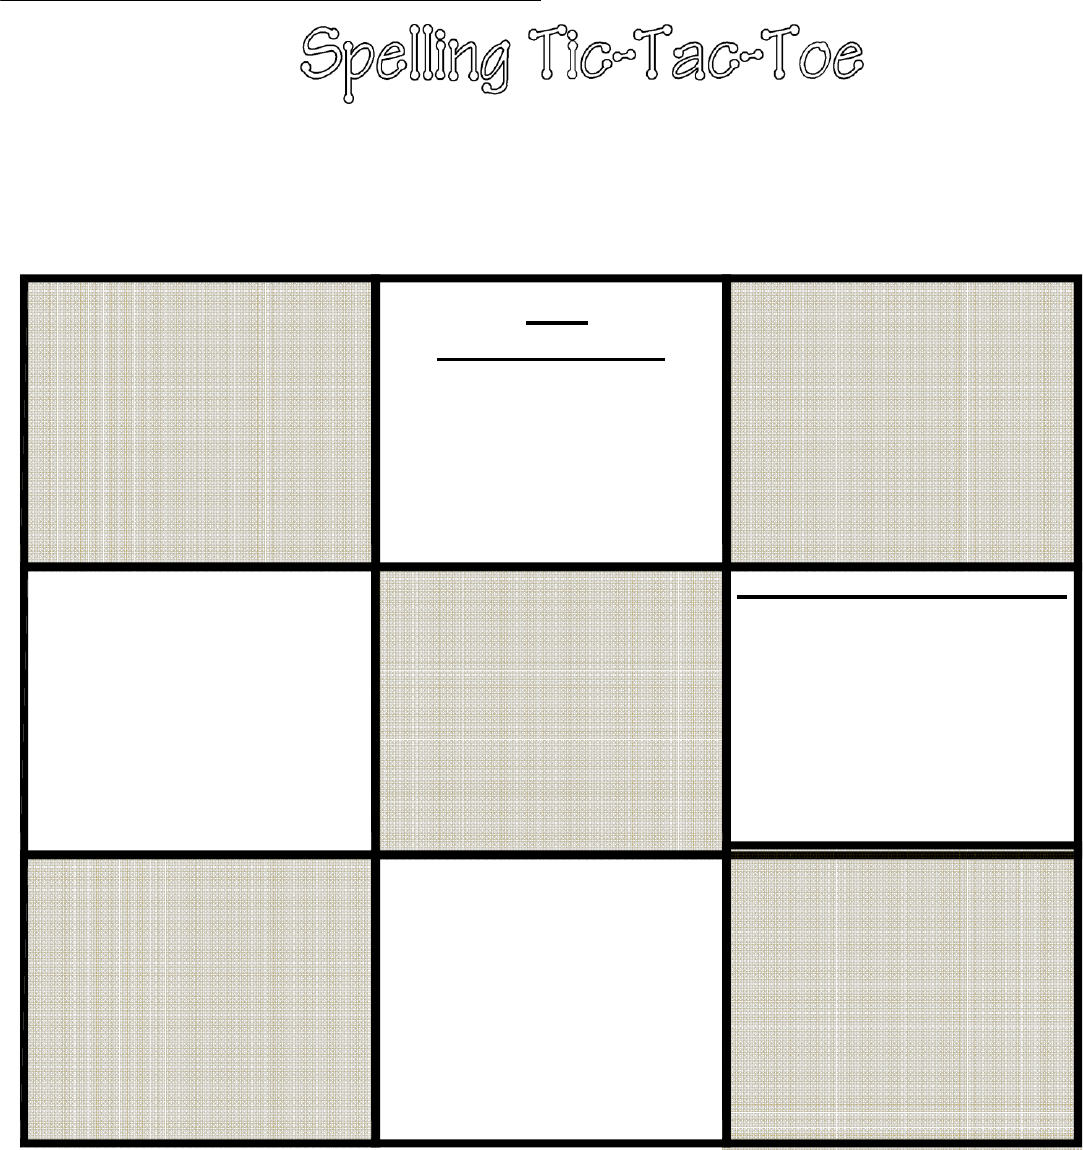 67A Tic Tac Toe Template | Wiring Library Within Tic Tac Toe Template Word